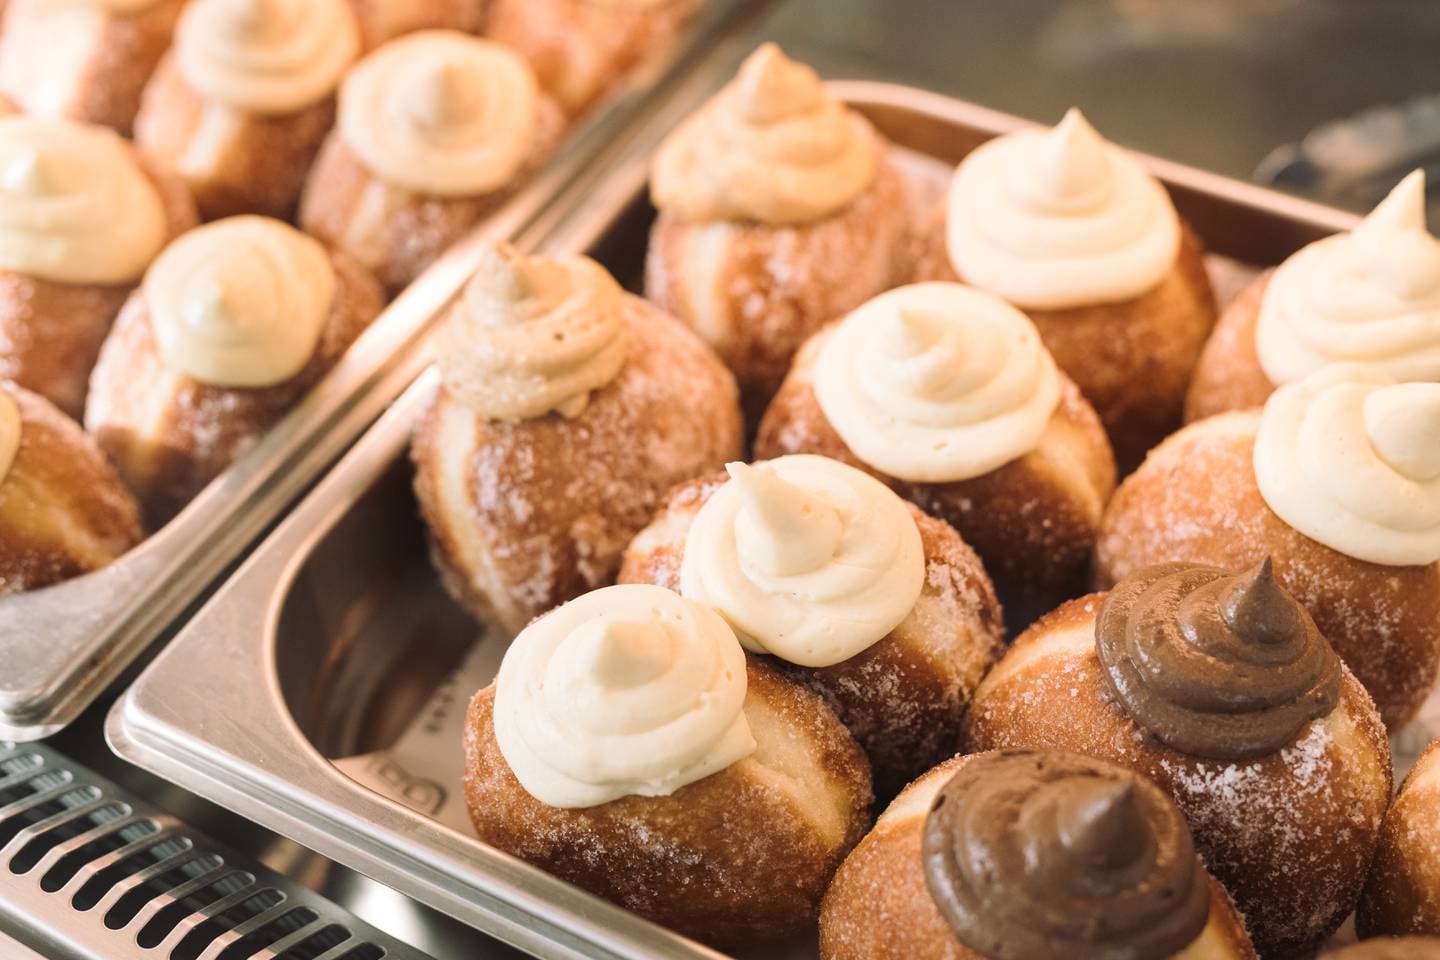 Bread Ahead serves some exclusive-to-Dubai baked goods. Photo: Bread Ahead